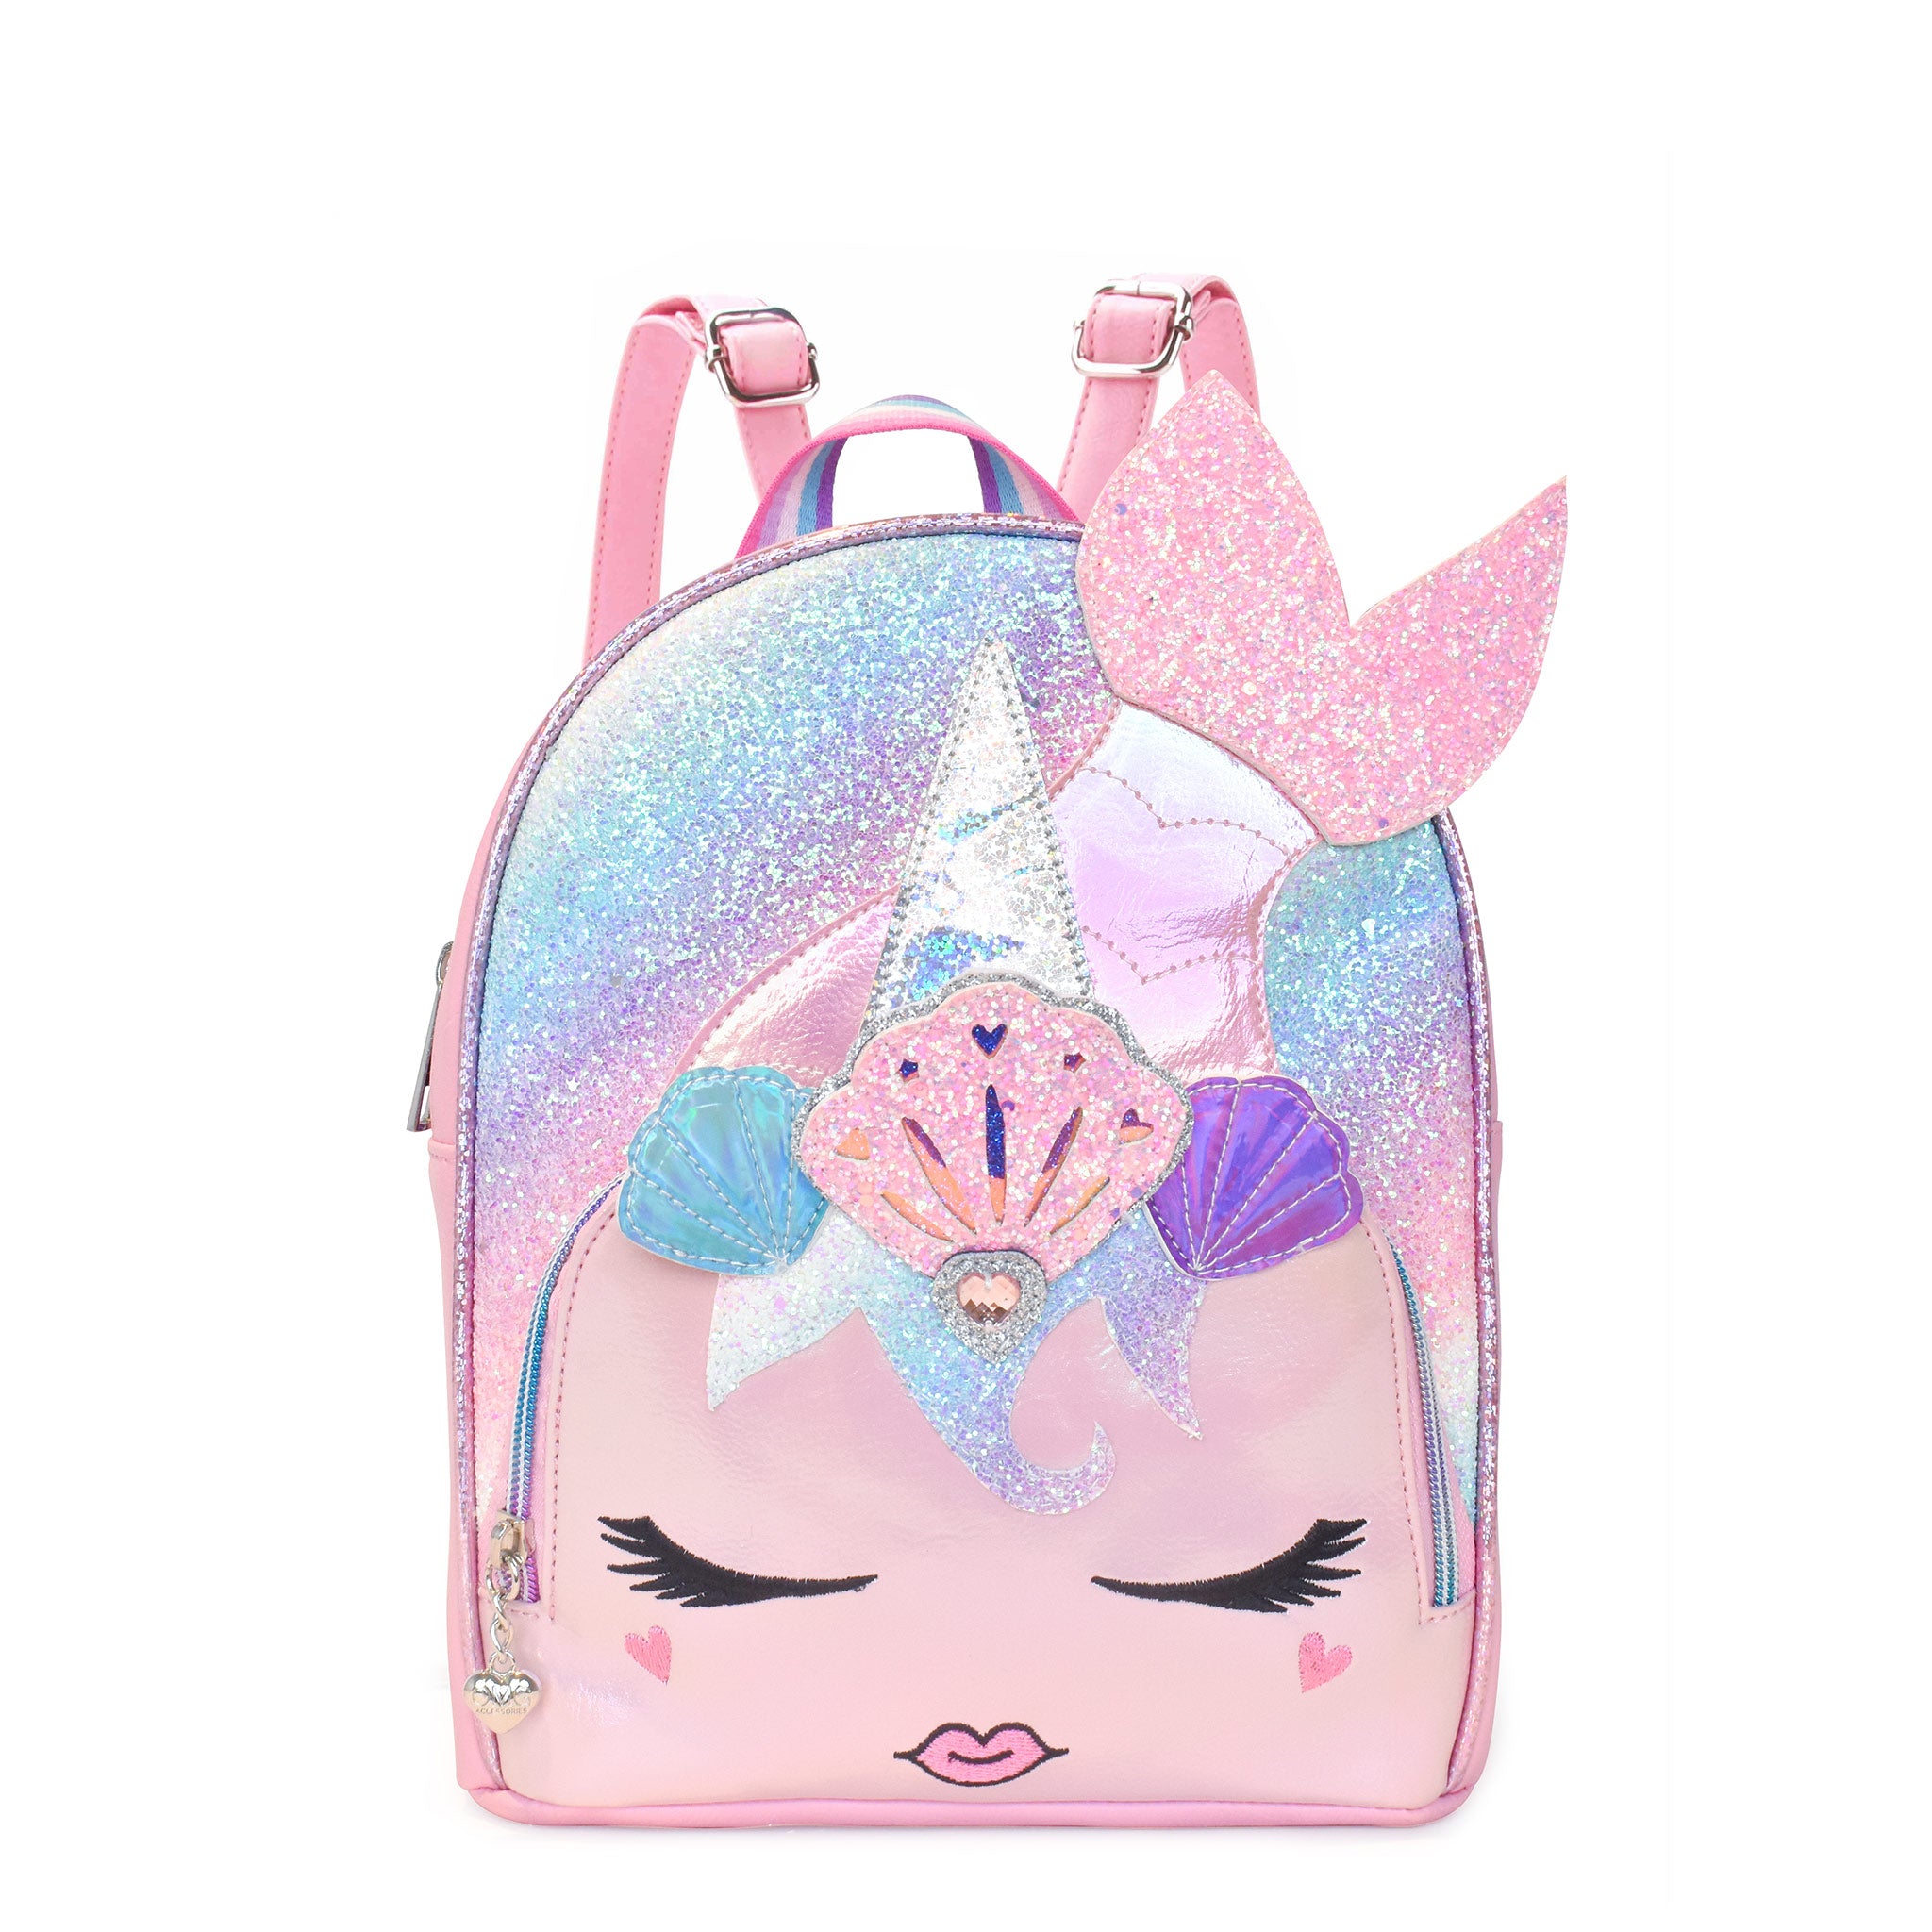 Front view of a unicorn mermaid mini backpack in an ombre glitter , embellished with a seashell crown